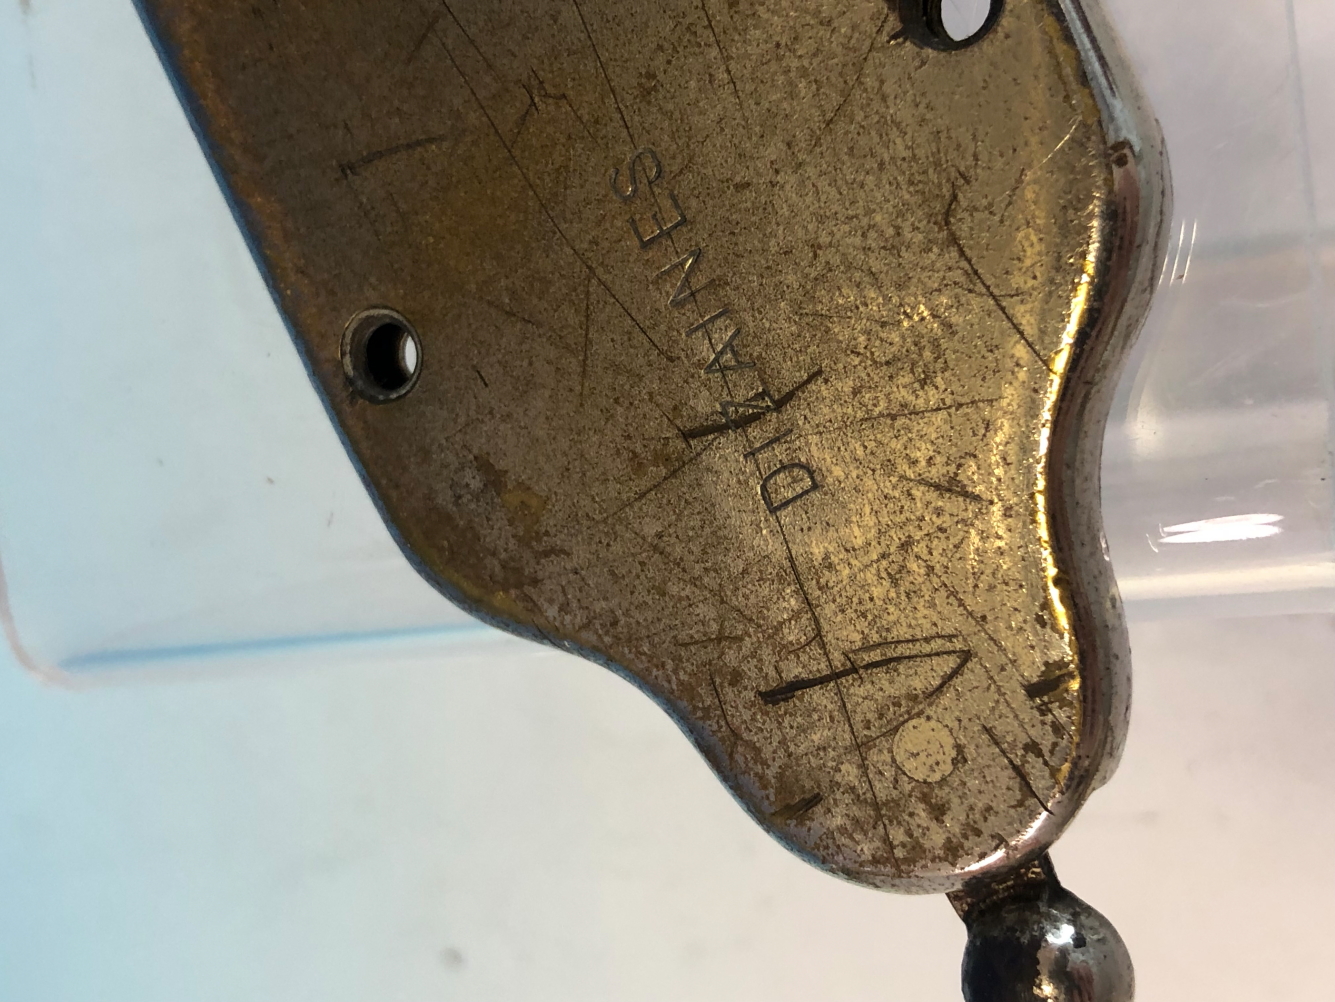 AN ANTIQUE FRENCH NICKEL PLATED BRASS TALLY COUNTER INSCRIBED - RIVOIRE Btf SDGD-ABADIE, 75 RUE - Image 5 of 7